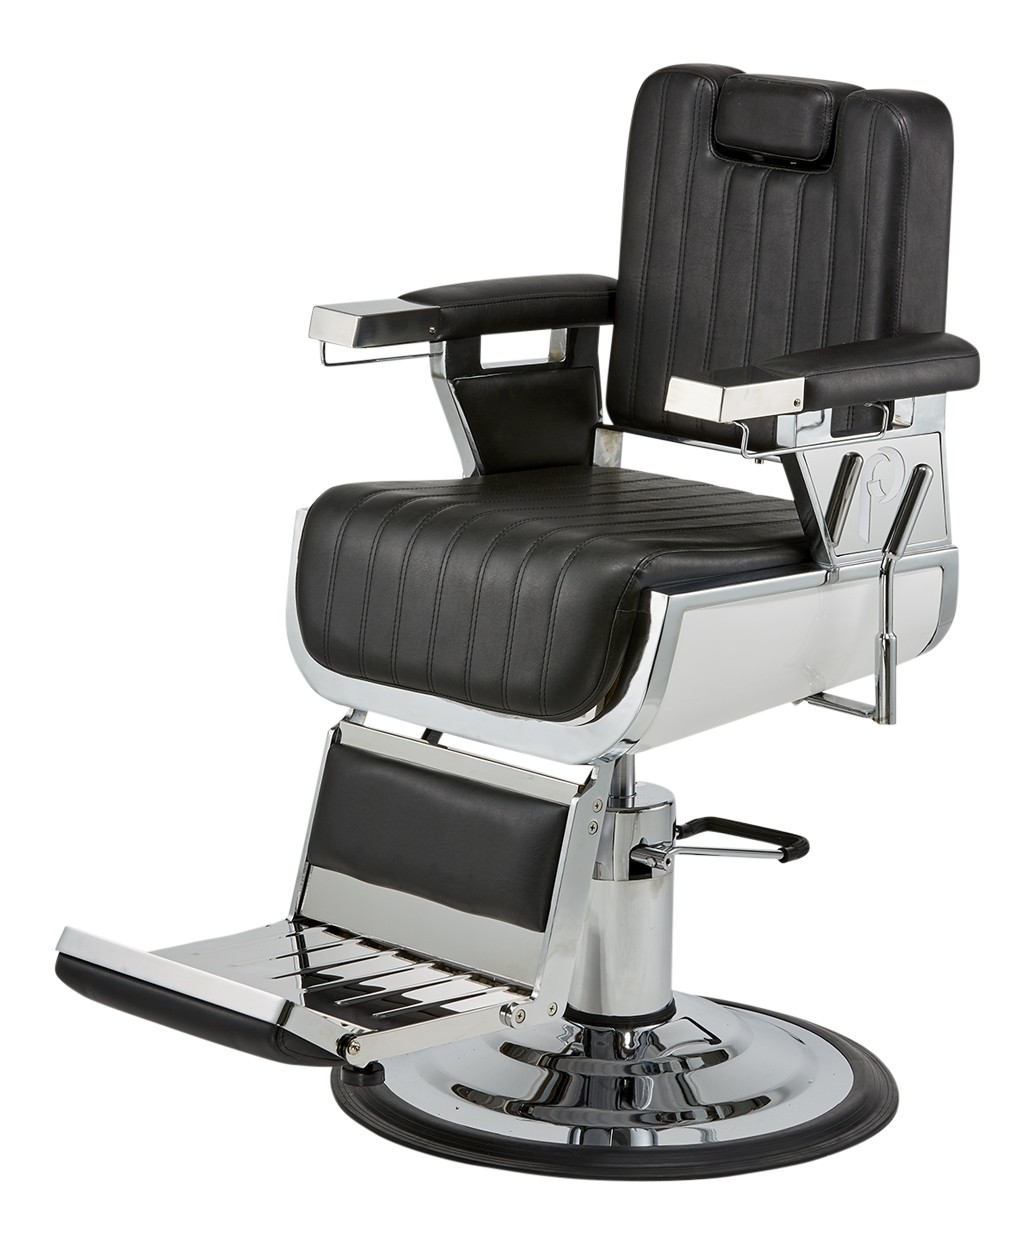 Pibbs barber chair Black with headrest in - PIB-661 